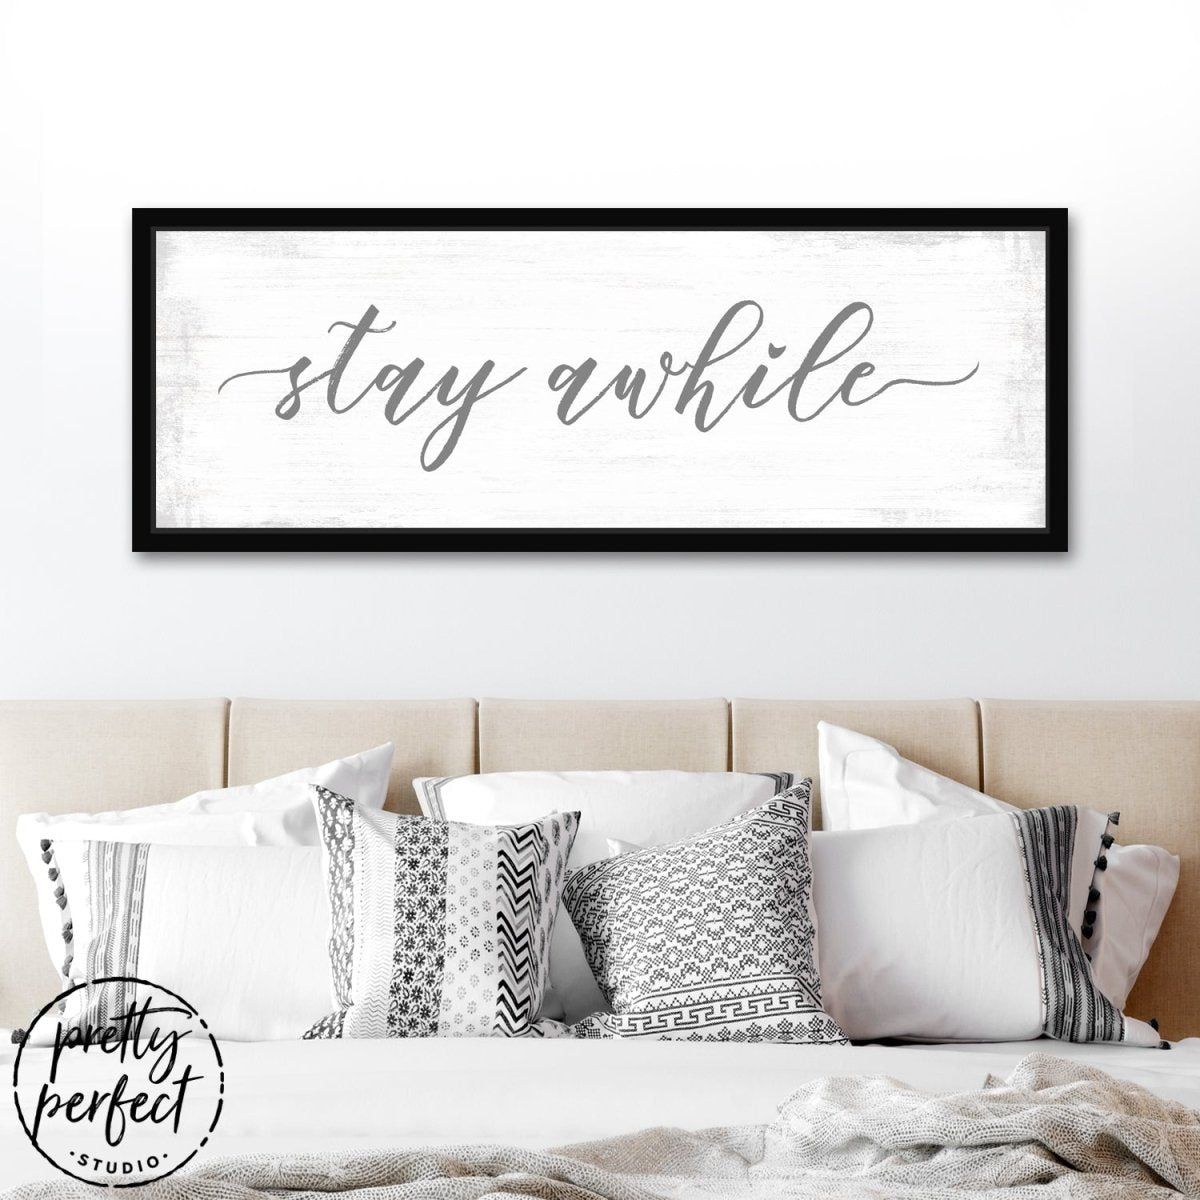 Stay Awhile Large Rectangle Sign in Master Bedroom - Pretty Perfect Studio